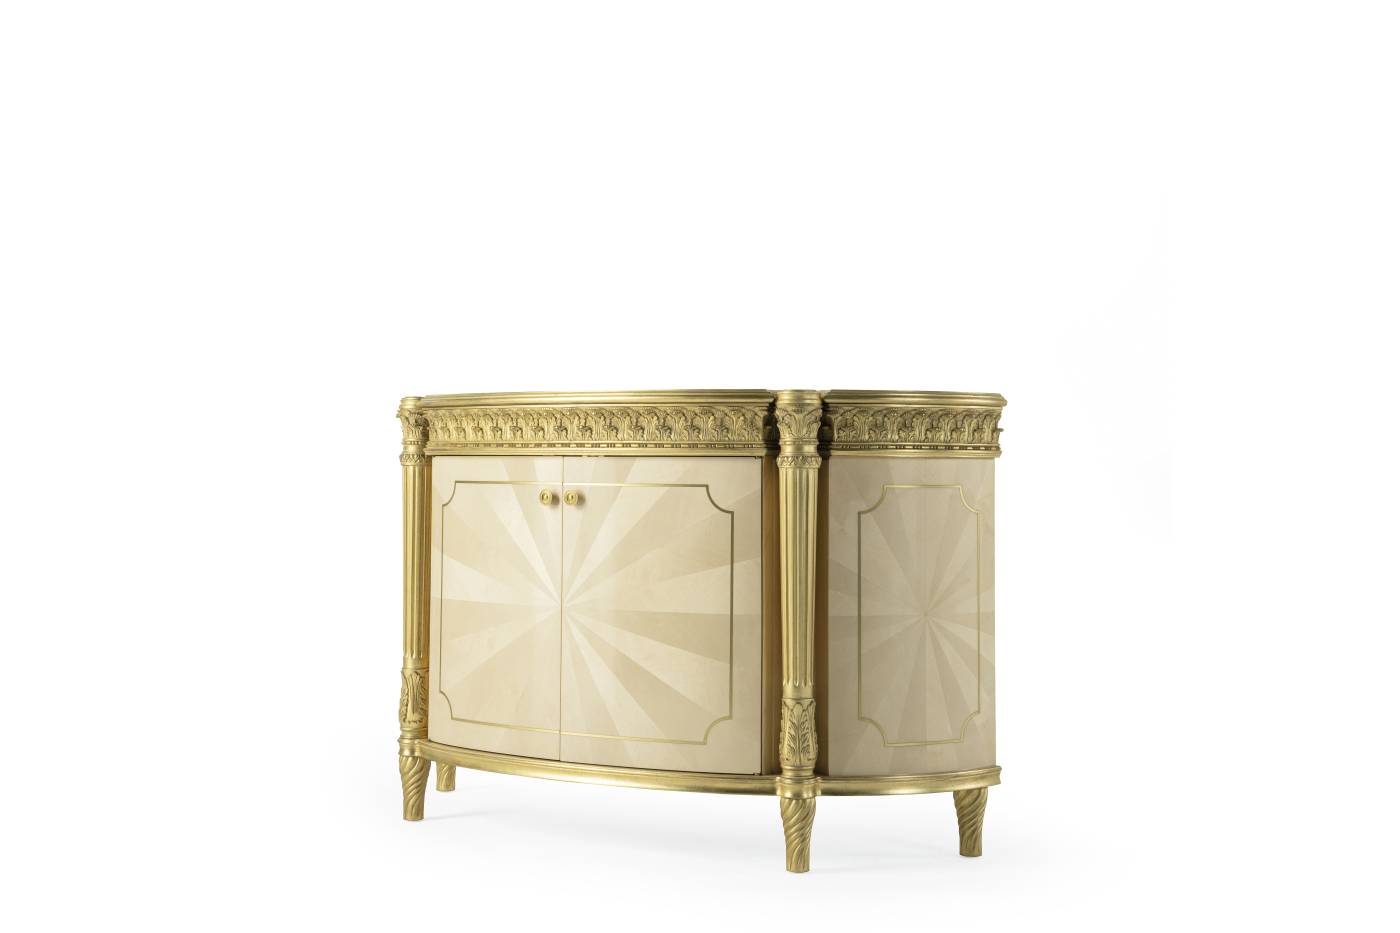 BOULEVARD sideboard – Transform your space with luxury Made in Italy classic day storage units of Héritage collection.